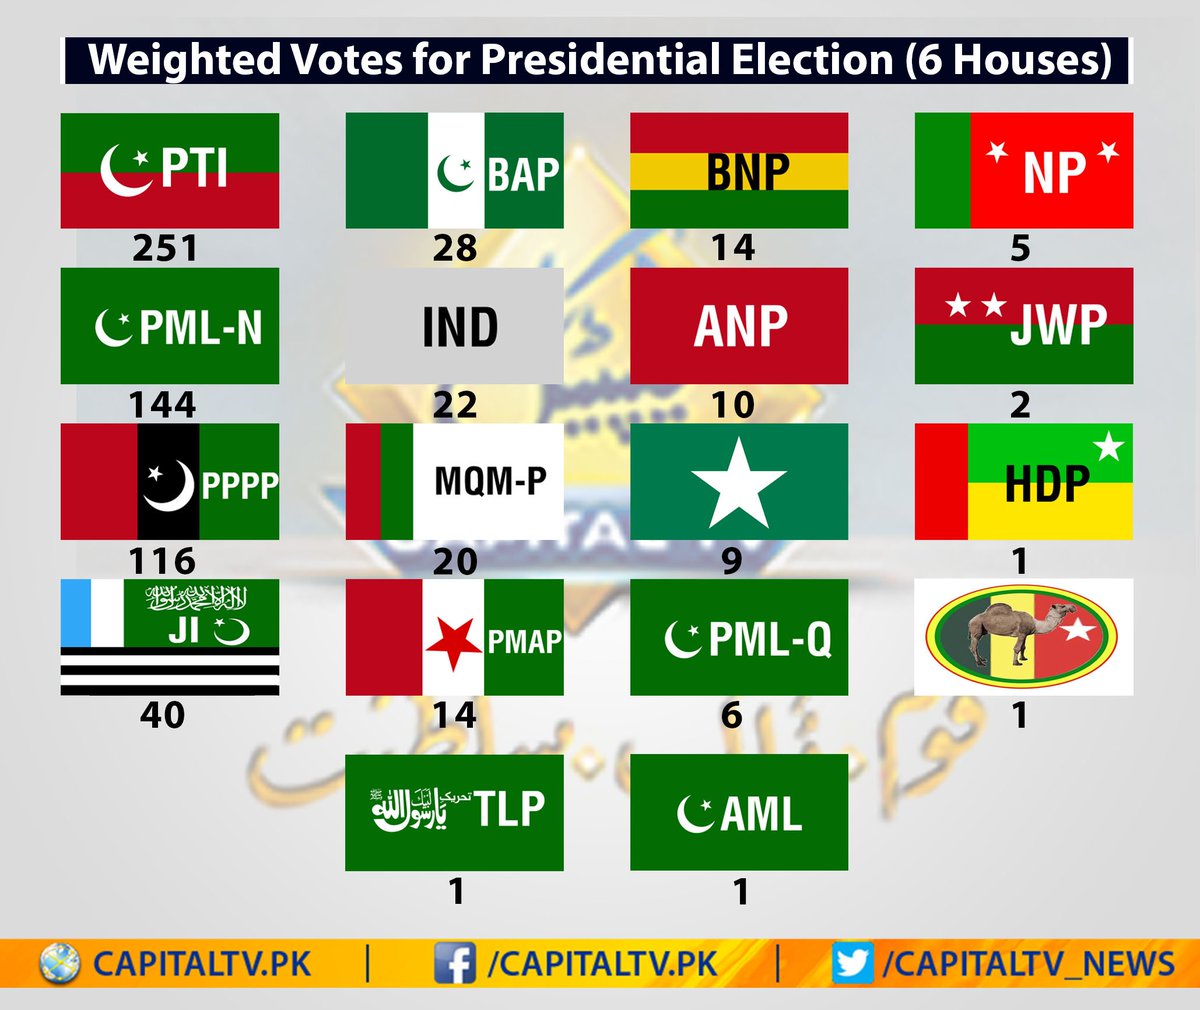 Weighted Votes for Presidential Election (6 Houses)